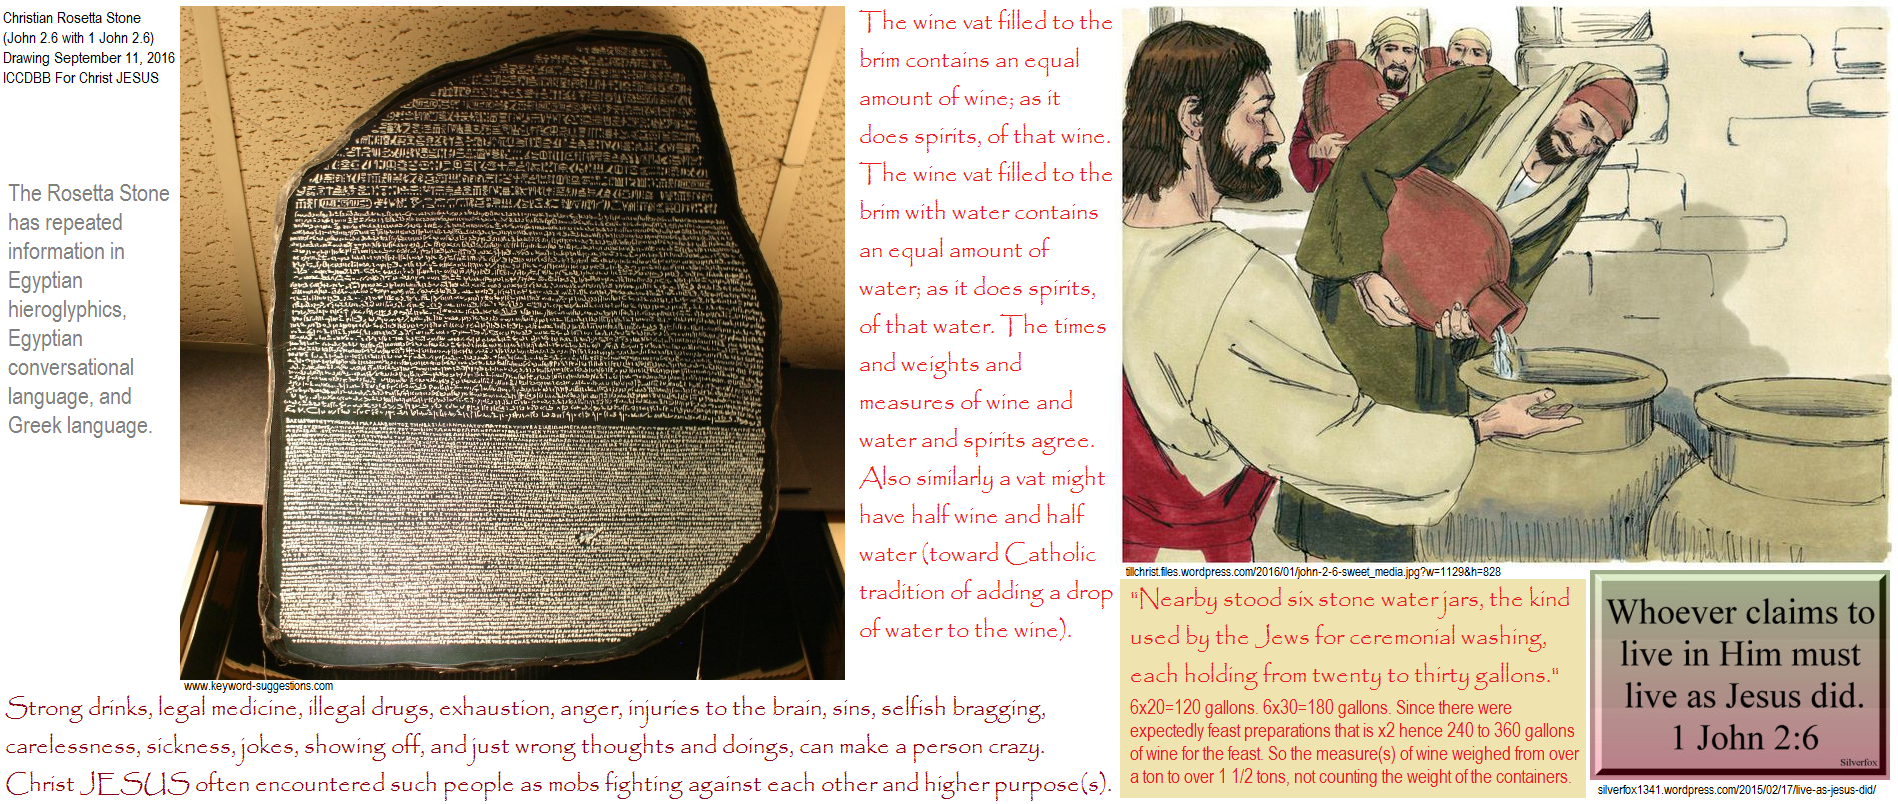 Christian Rosetta Stone: the first miracle of Jesus Christ. Egyptian hieroglyphics, Egyptian conversational language, and Greek language; three languages of one story. Water Blood Spirit as One in Christ JESUS.